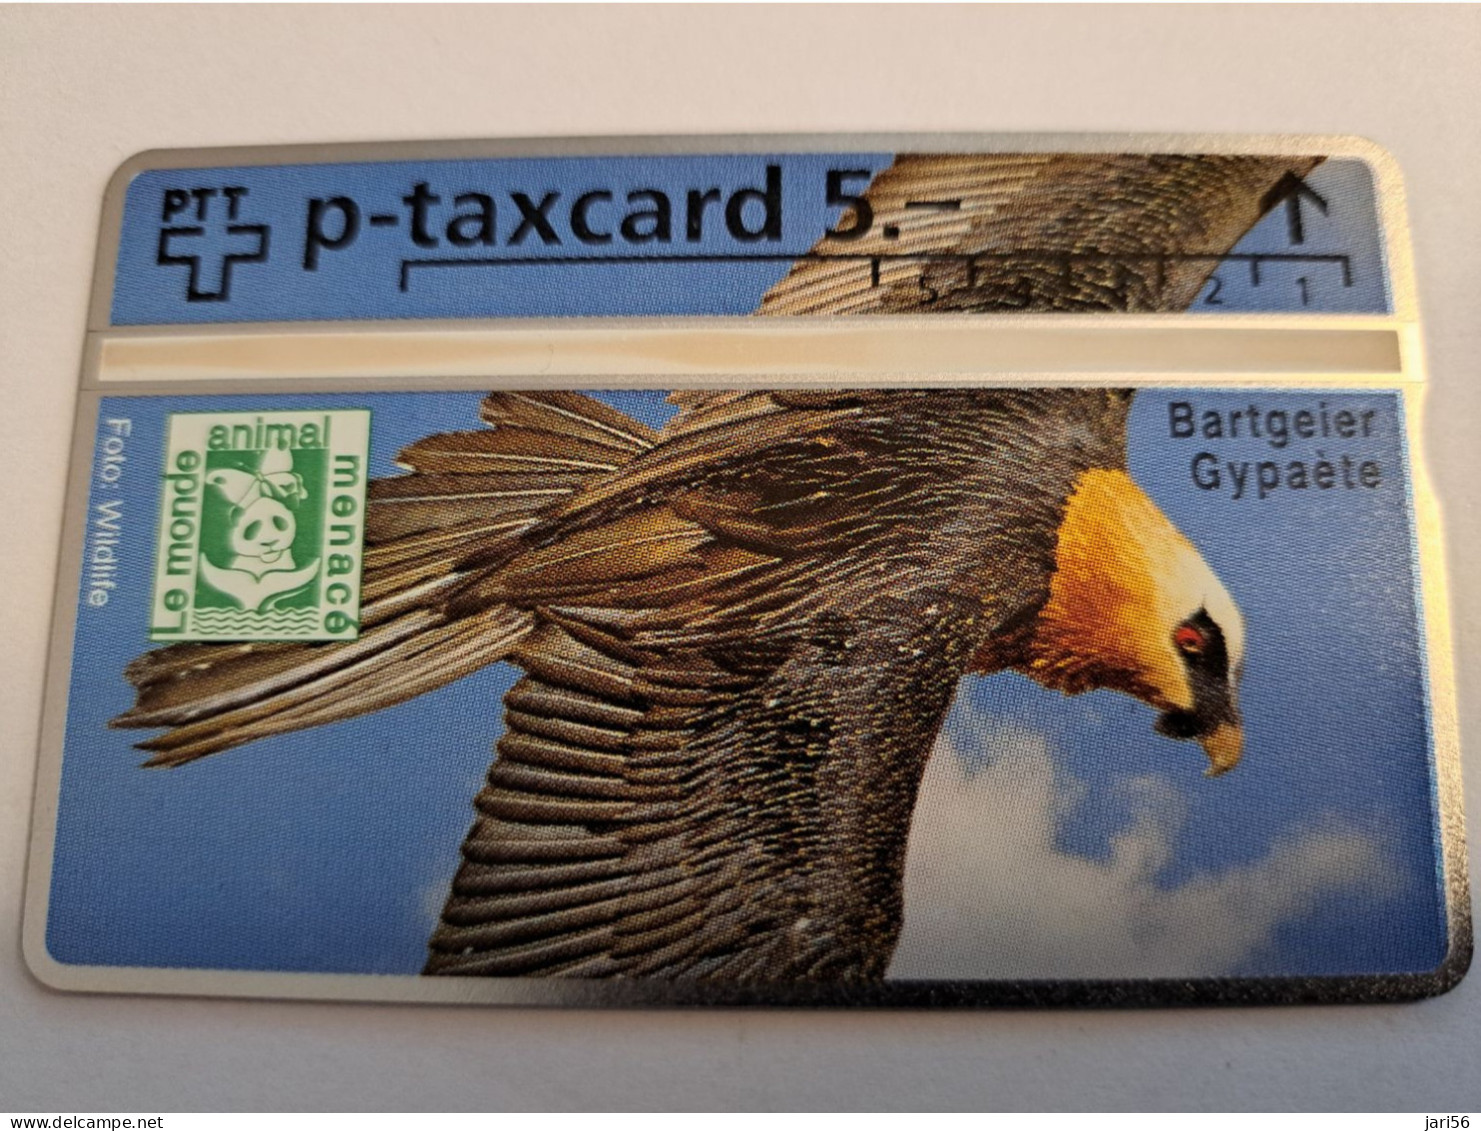 GERMANY/ SWIITSERLAND  PUZZLE/ BIRDS /EAGLES    / 2.000 EX   / 6 DM  CARD /CH 5,-     / MINT    **16267** - S-Series : Tills With Third Part Ads